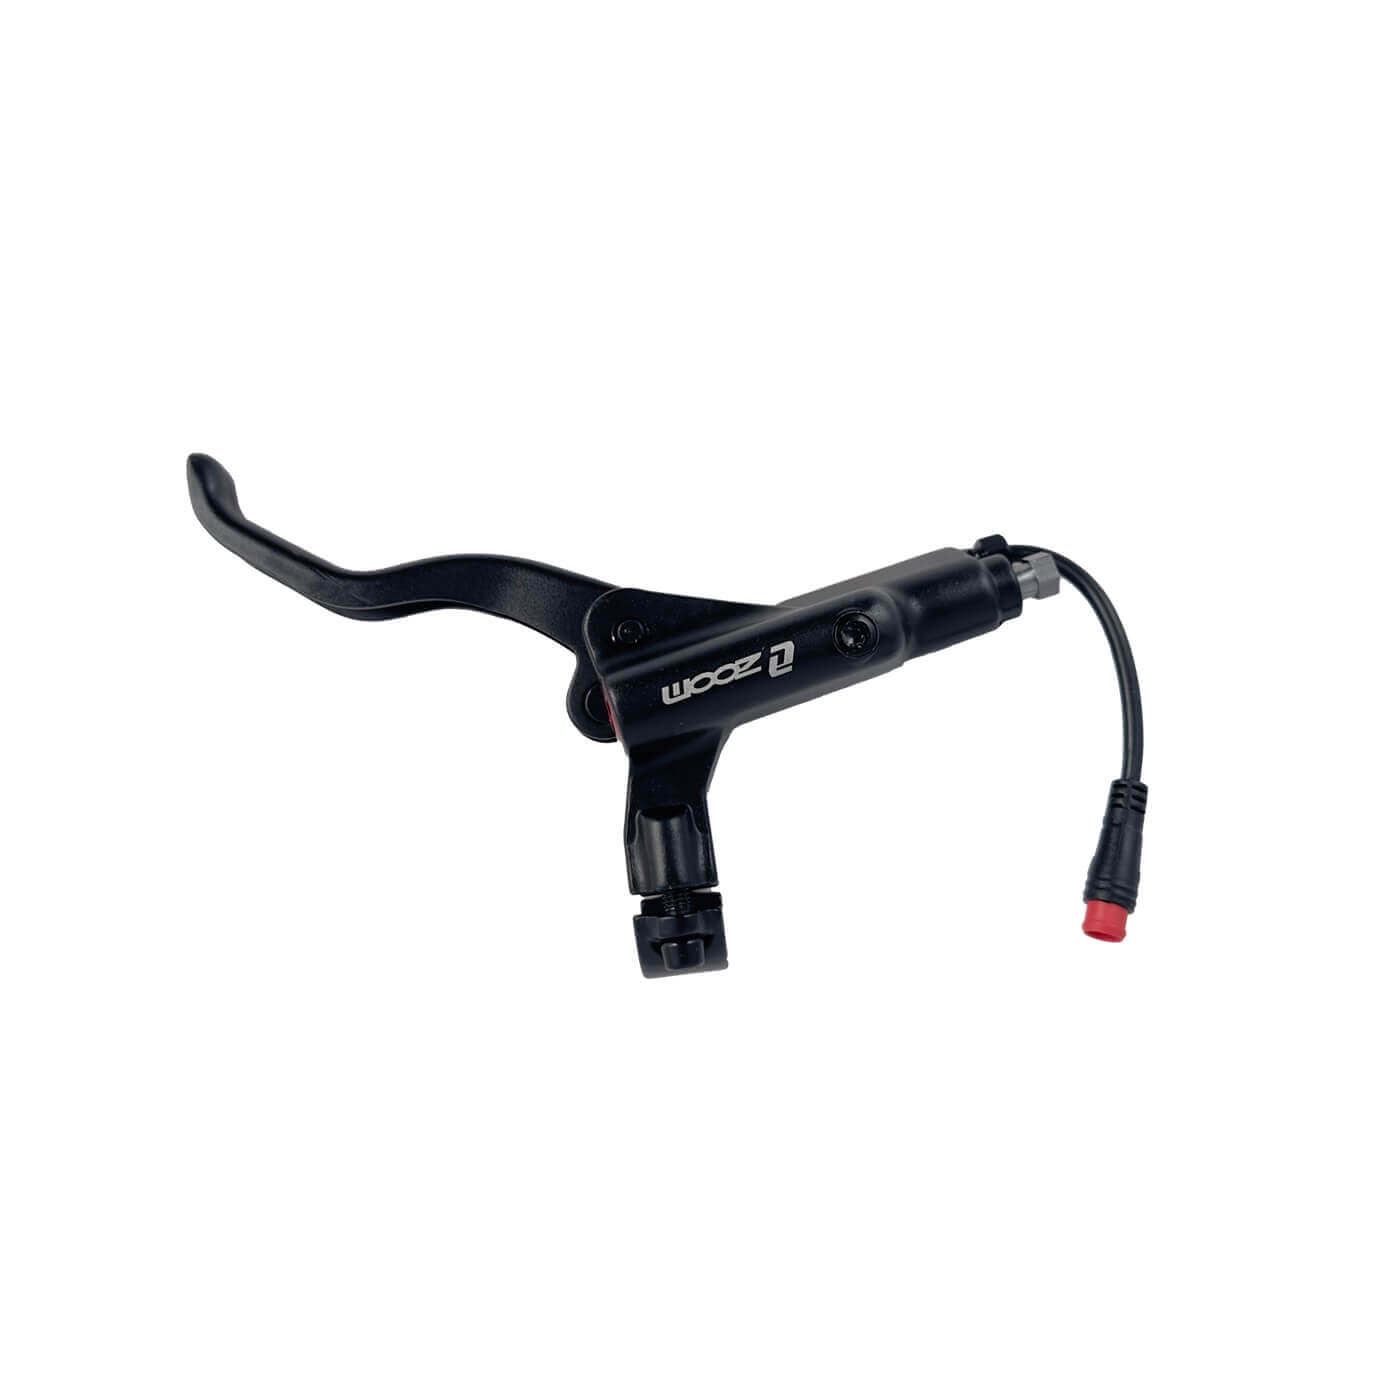 A Zoom Hydraulic Brake Lever - Left on a white background.